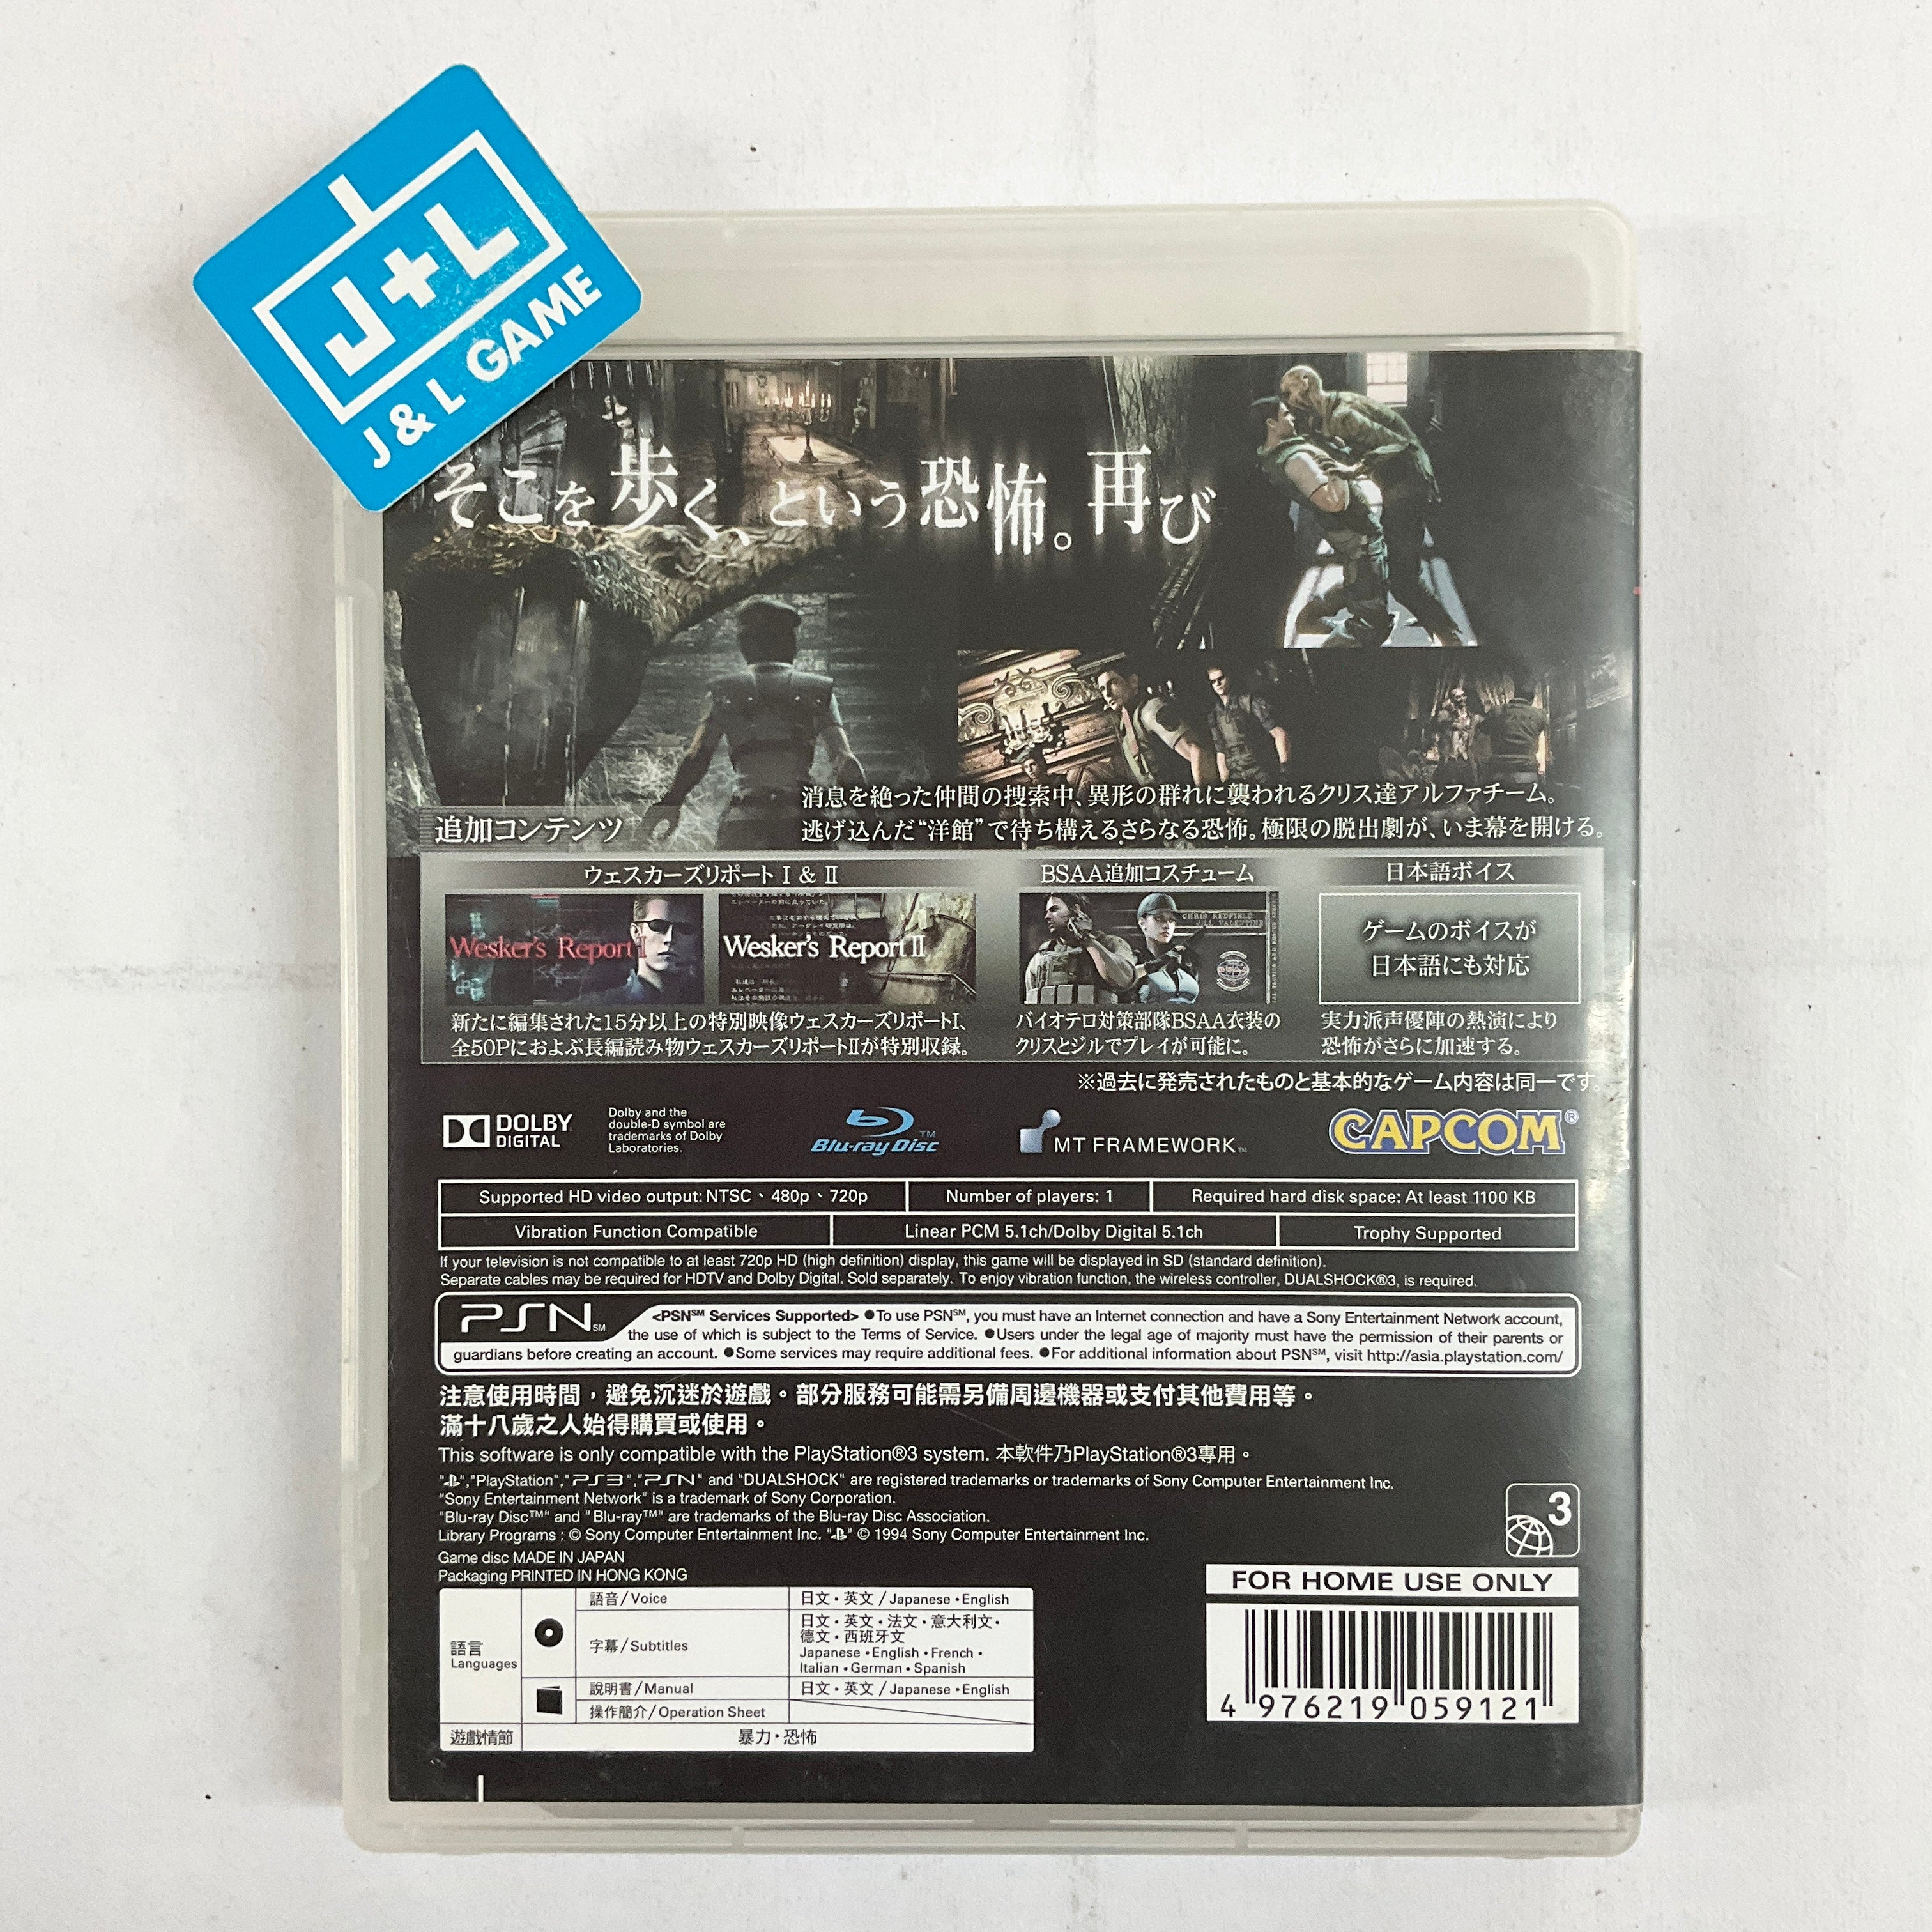 BioHazard HD Remaster - (PS3) PlayStation 3 [Pre-Owned] (Japanese Import) Video Games Capcom   